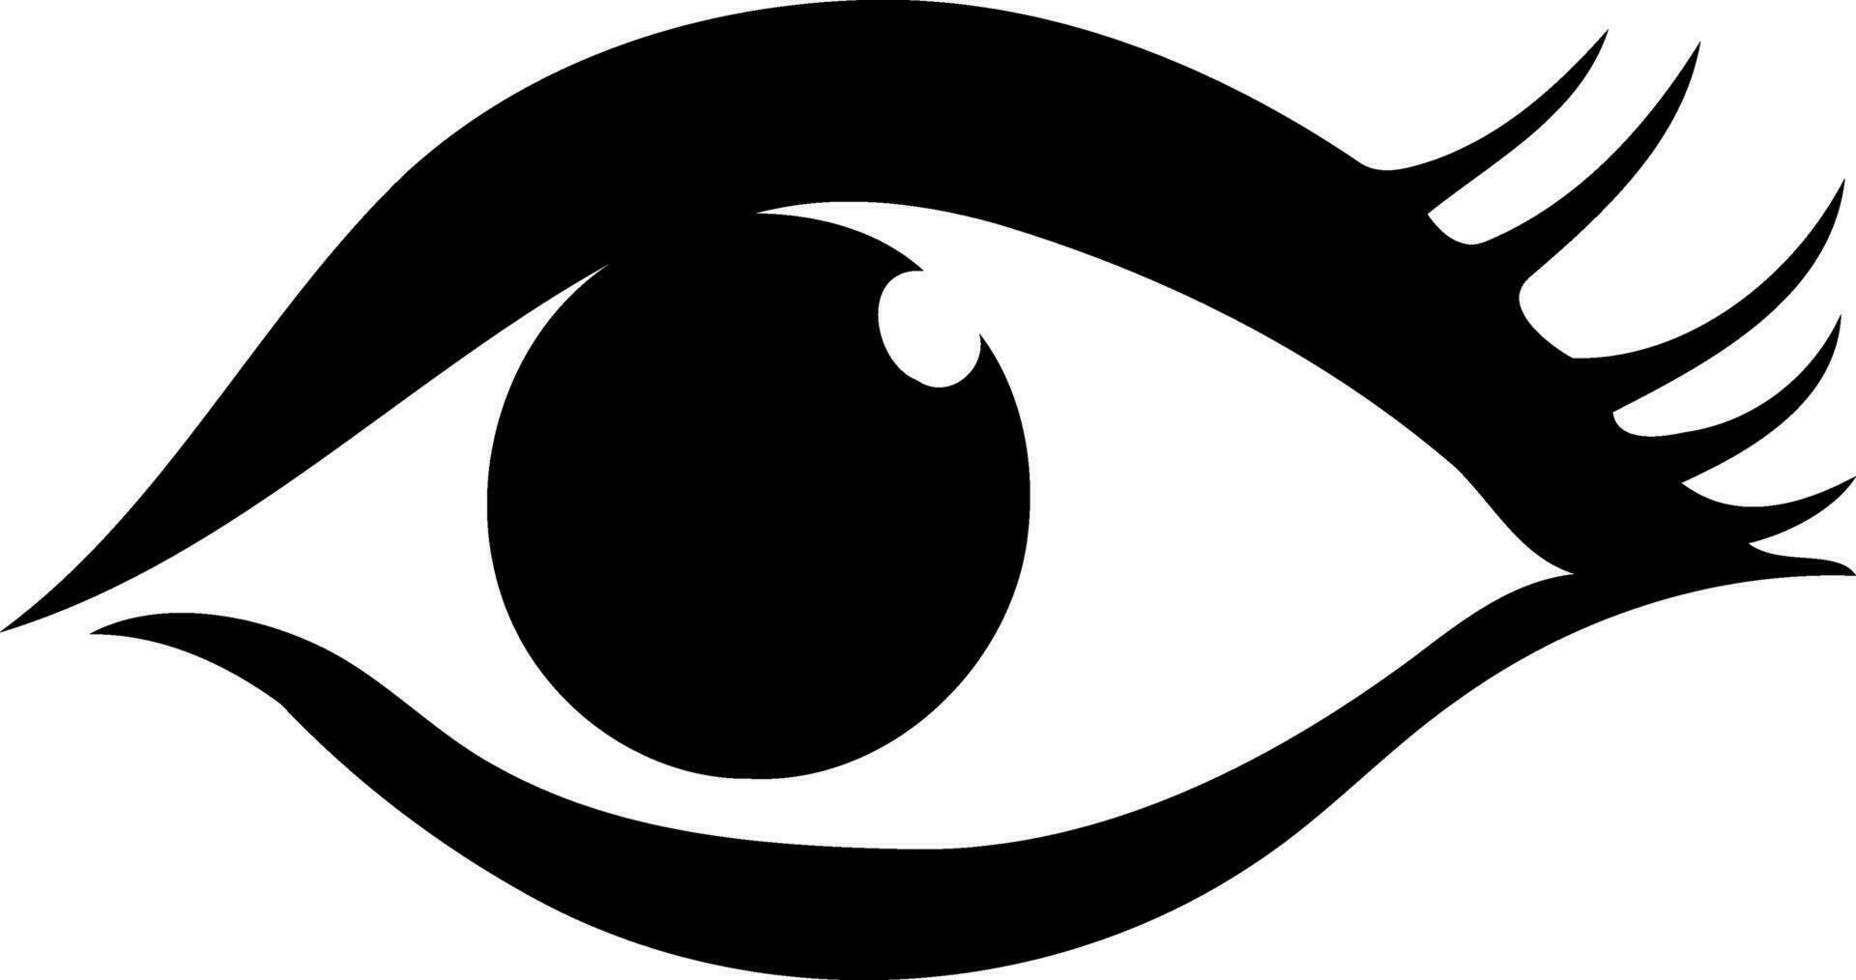 human eye in black and white vector